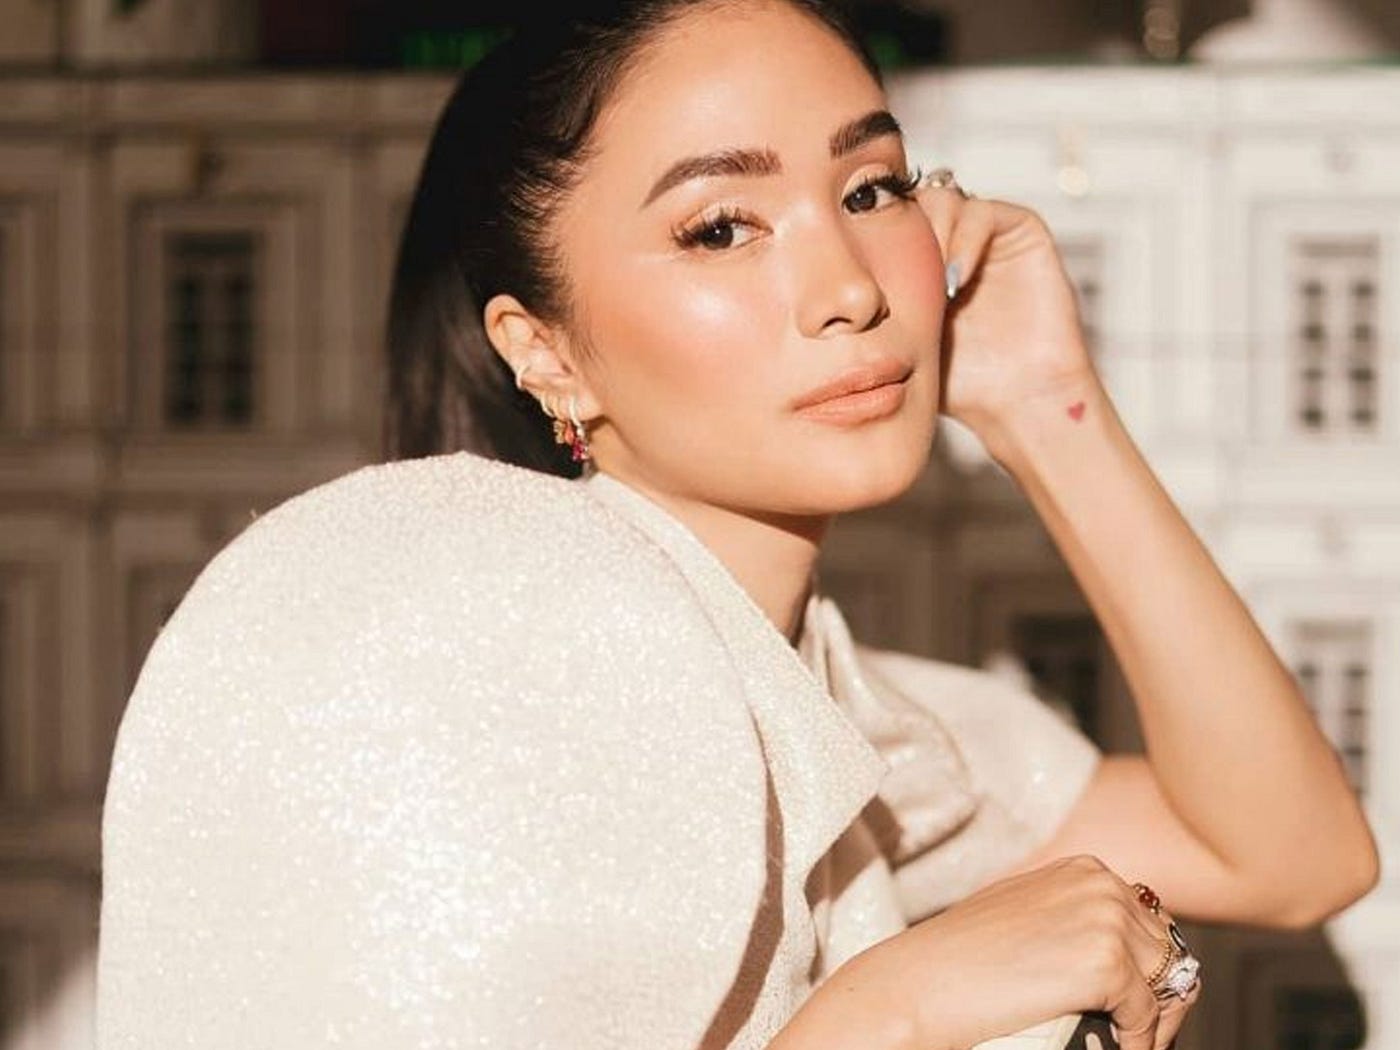 Heart Evangelista on Instagram: Feel good in what you wear and